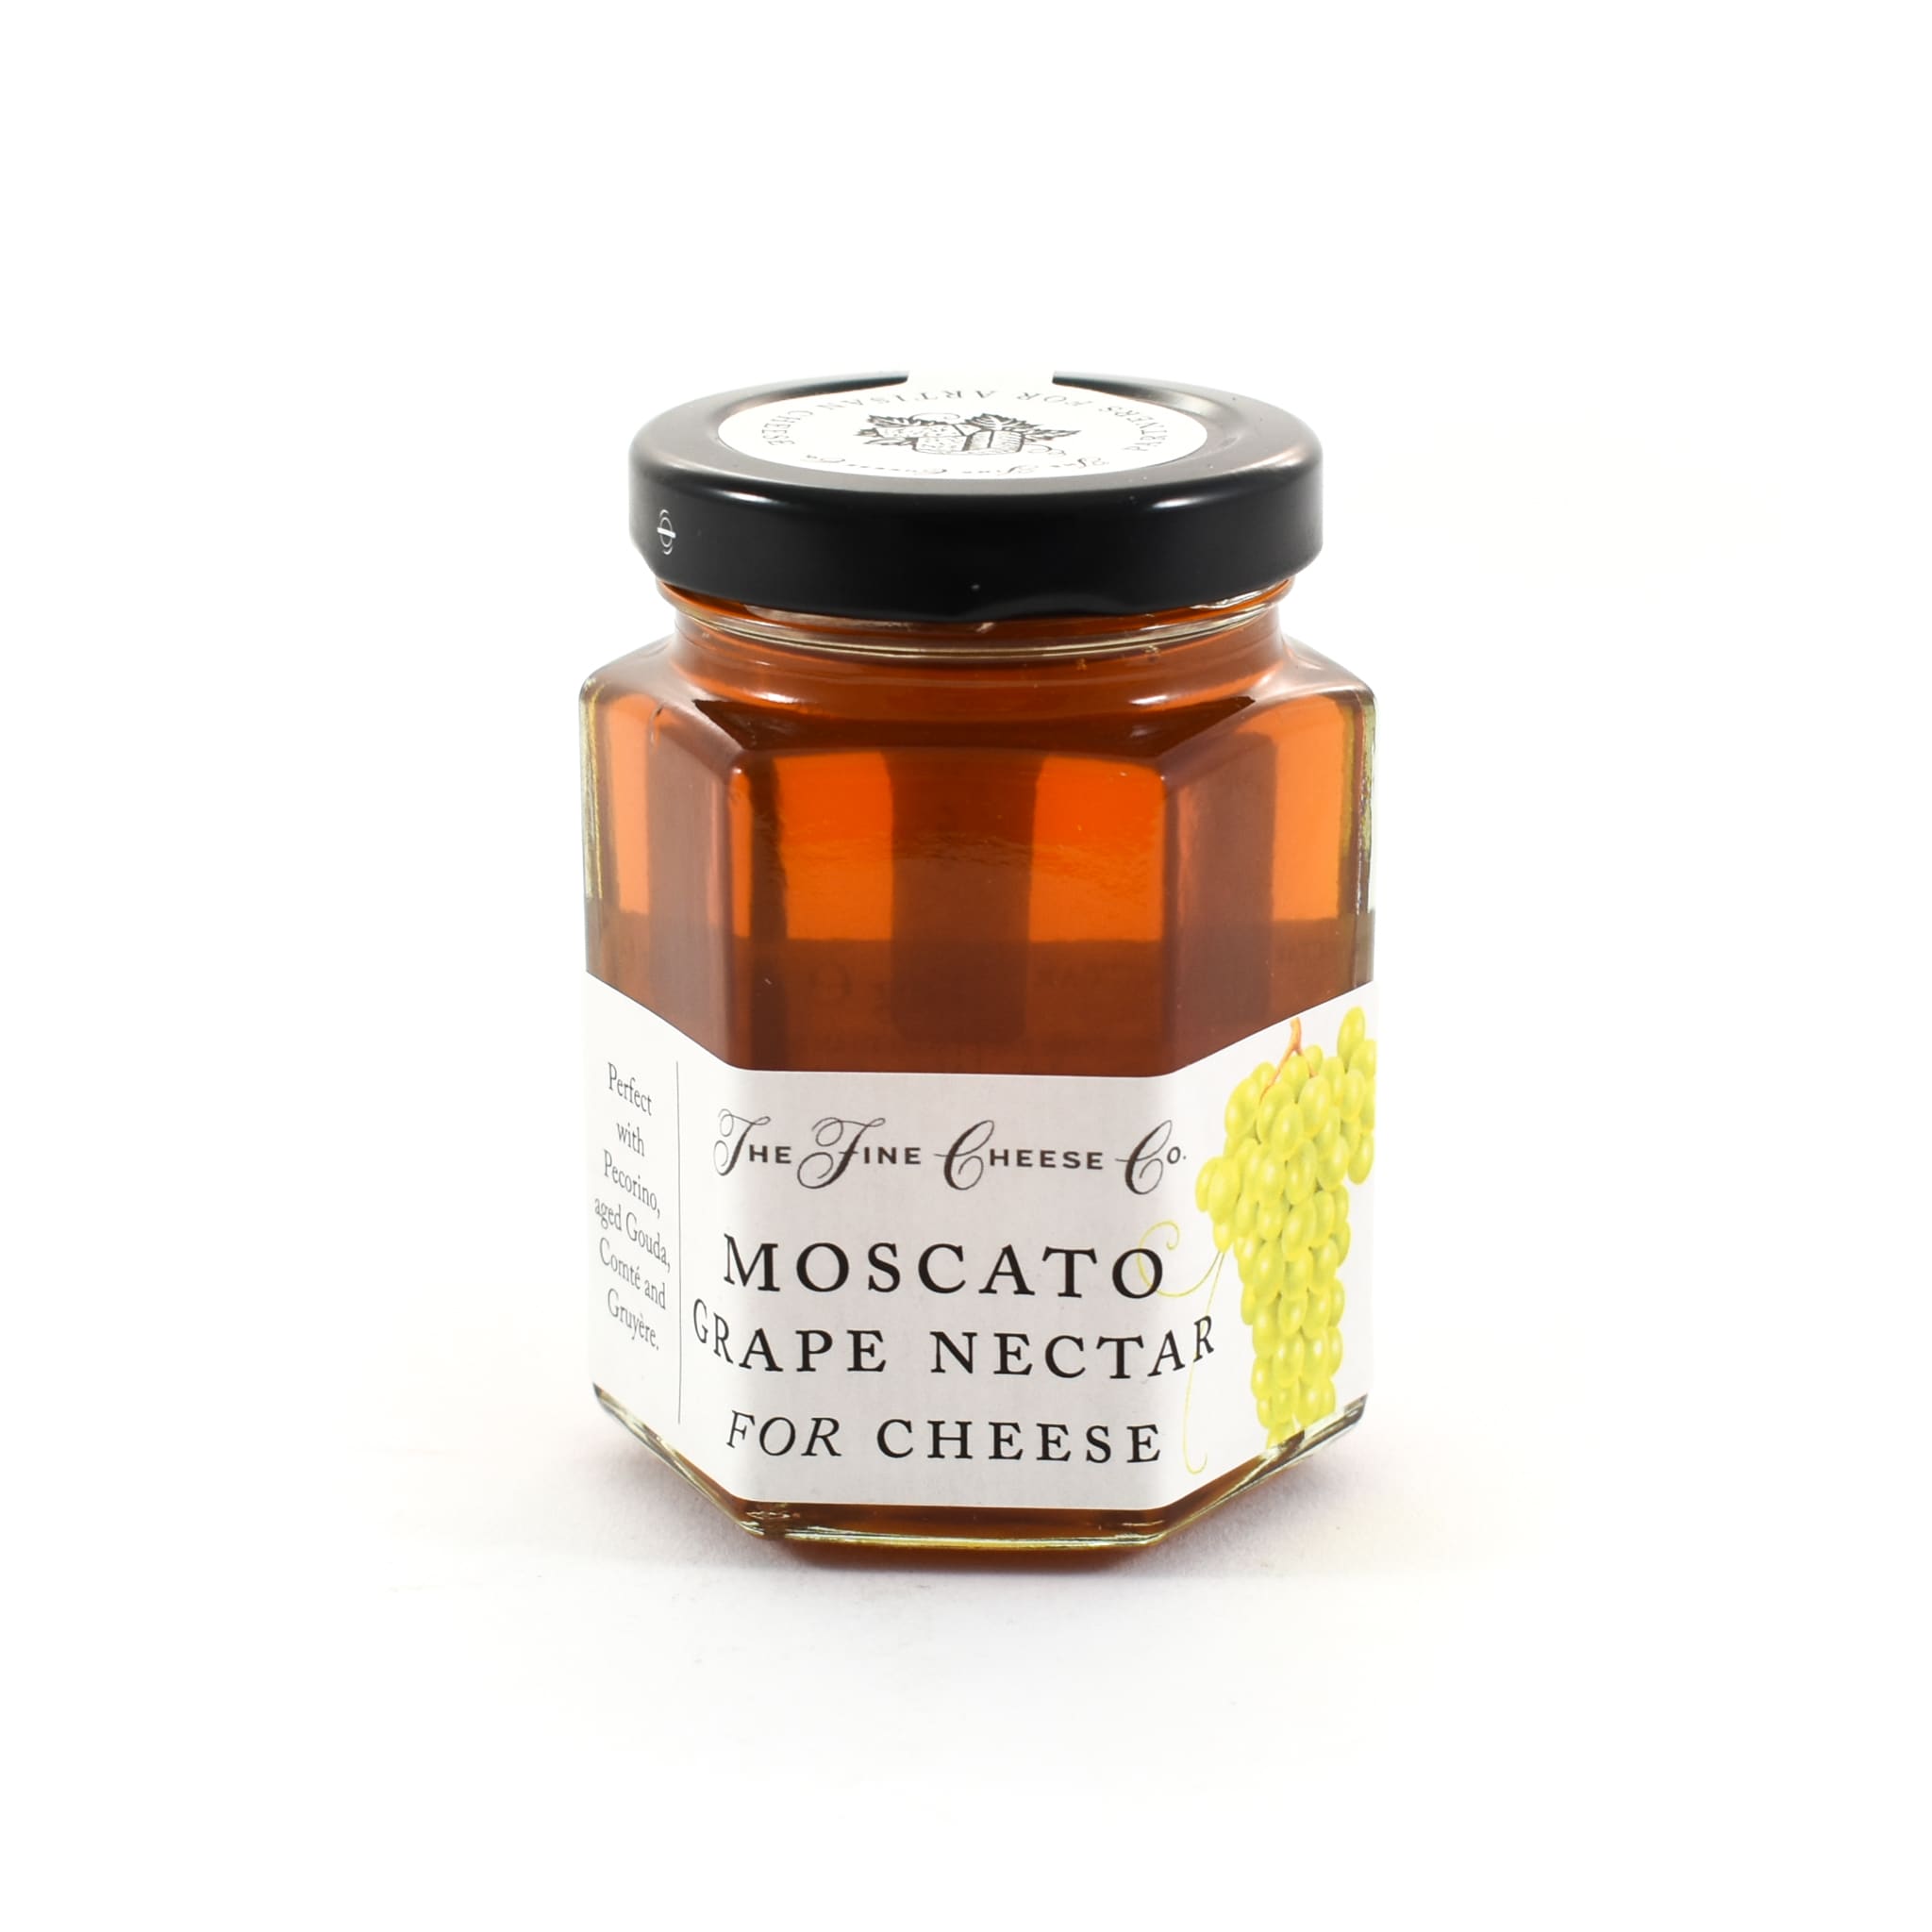 Moscato Grape Nectar for Cheese 140g